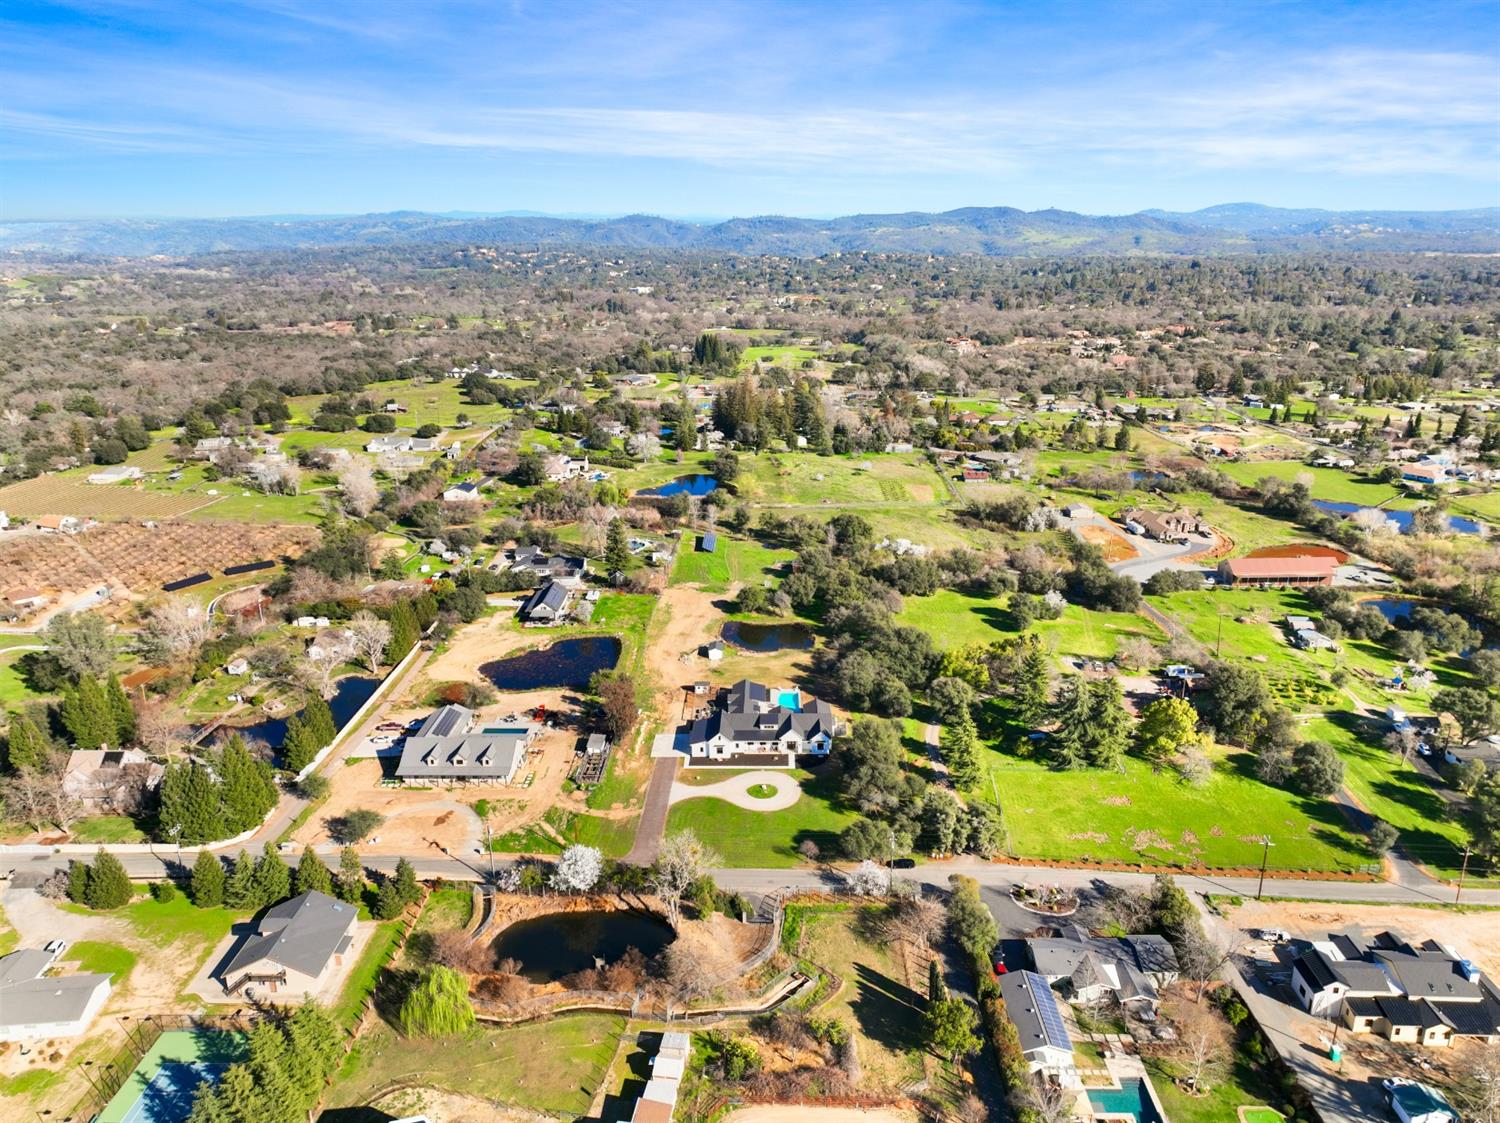 5 Star Plumbing | The Best Suburbs to Live in Sacramento